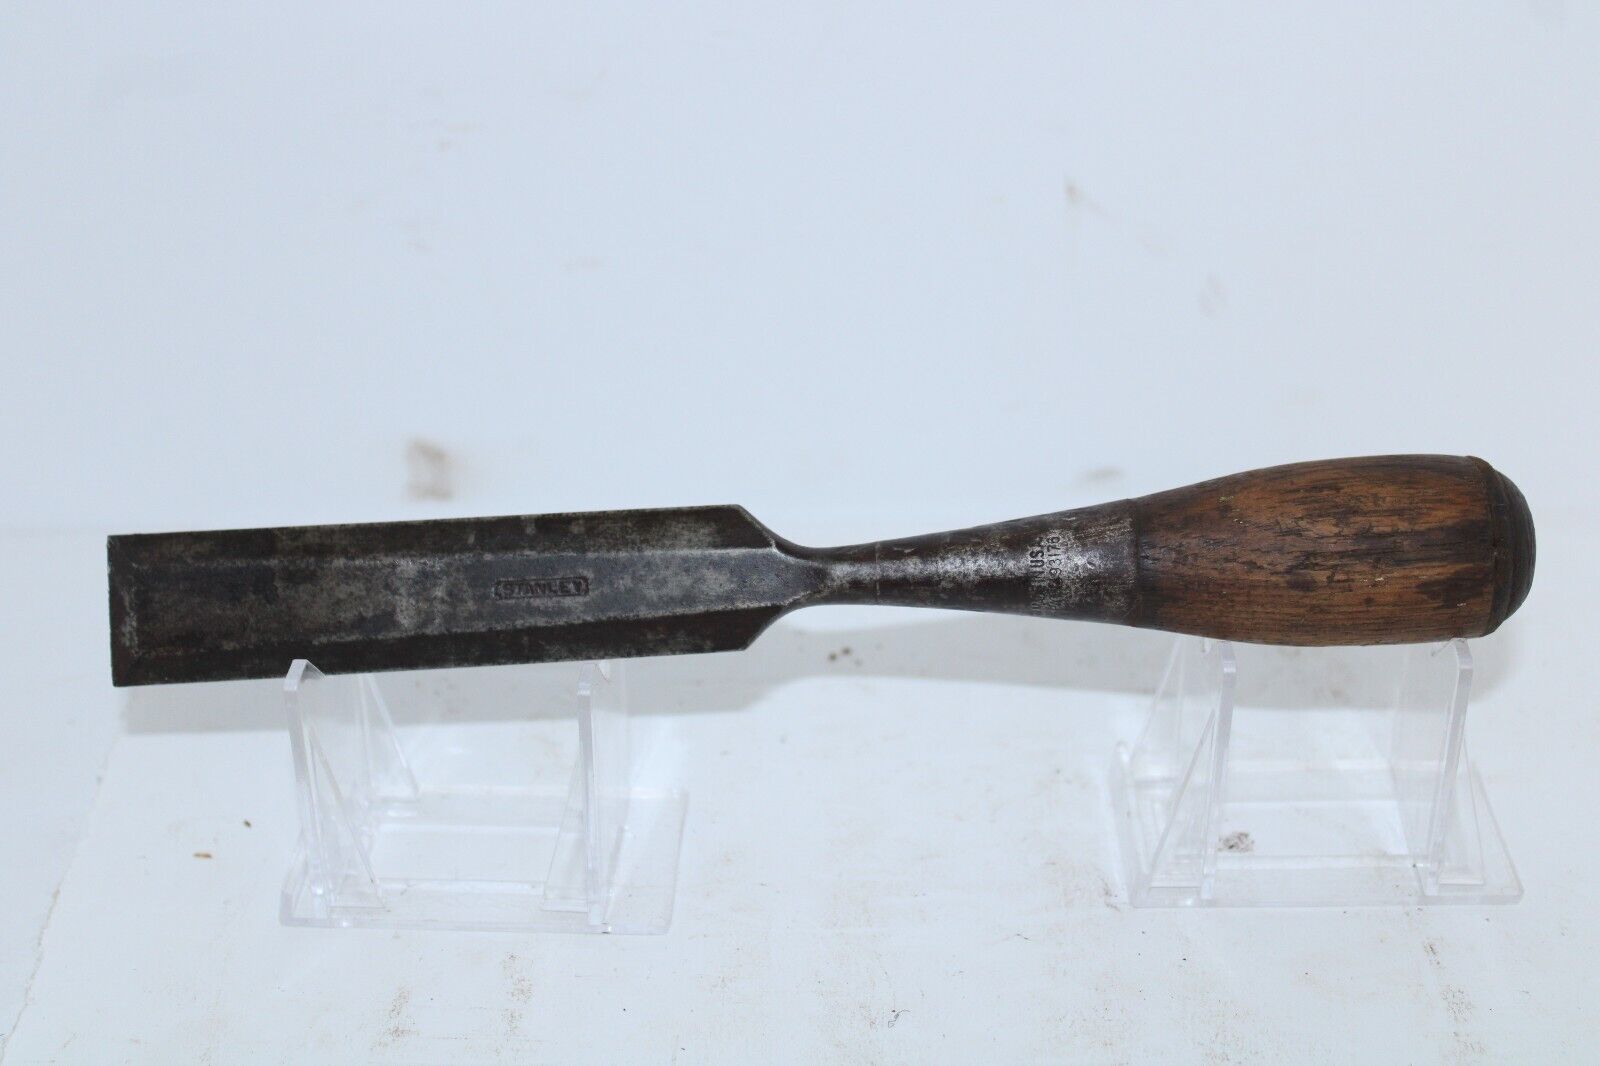 Stanley Everlasting Chisel 1 inch no. 50 Type 1 (1911-1920) Butt Chisel